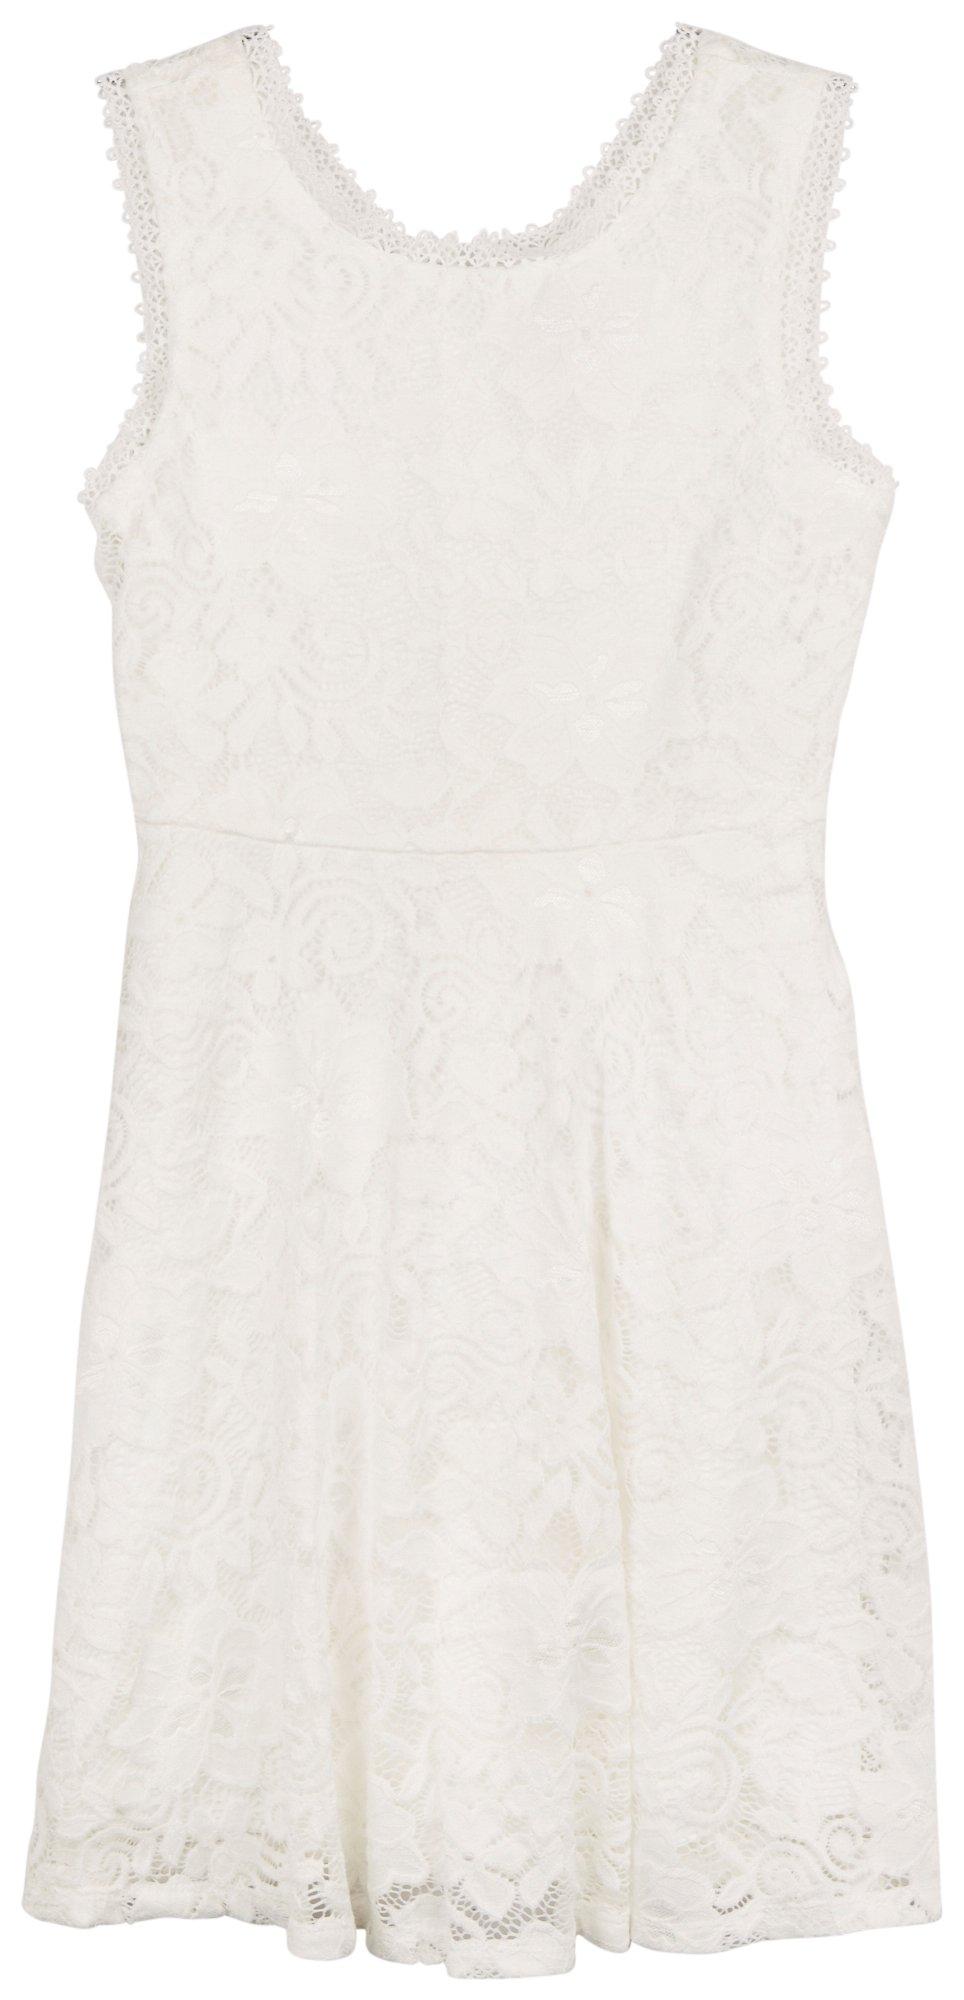 Speechless Big Girls White Lace Floral Dress